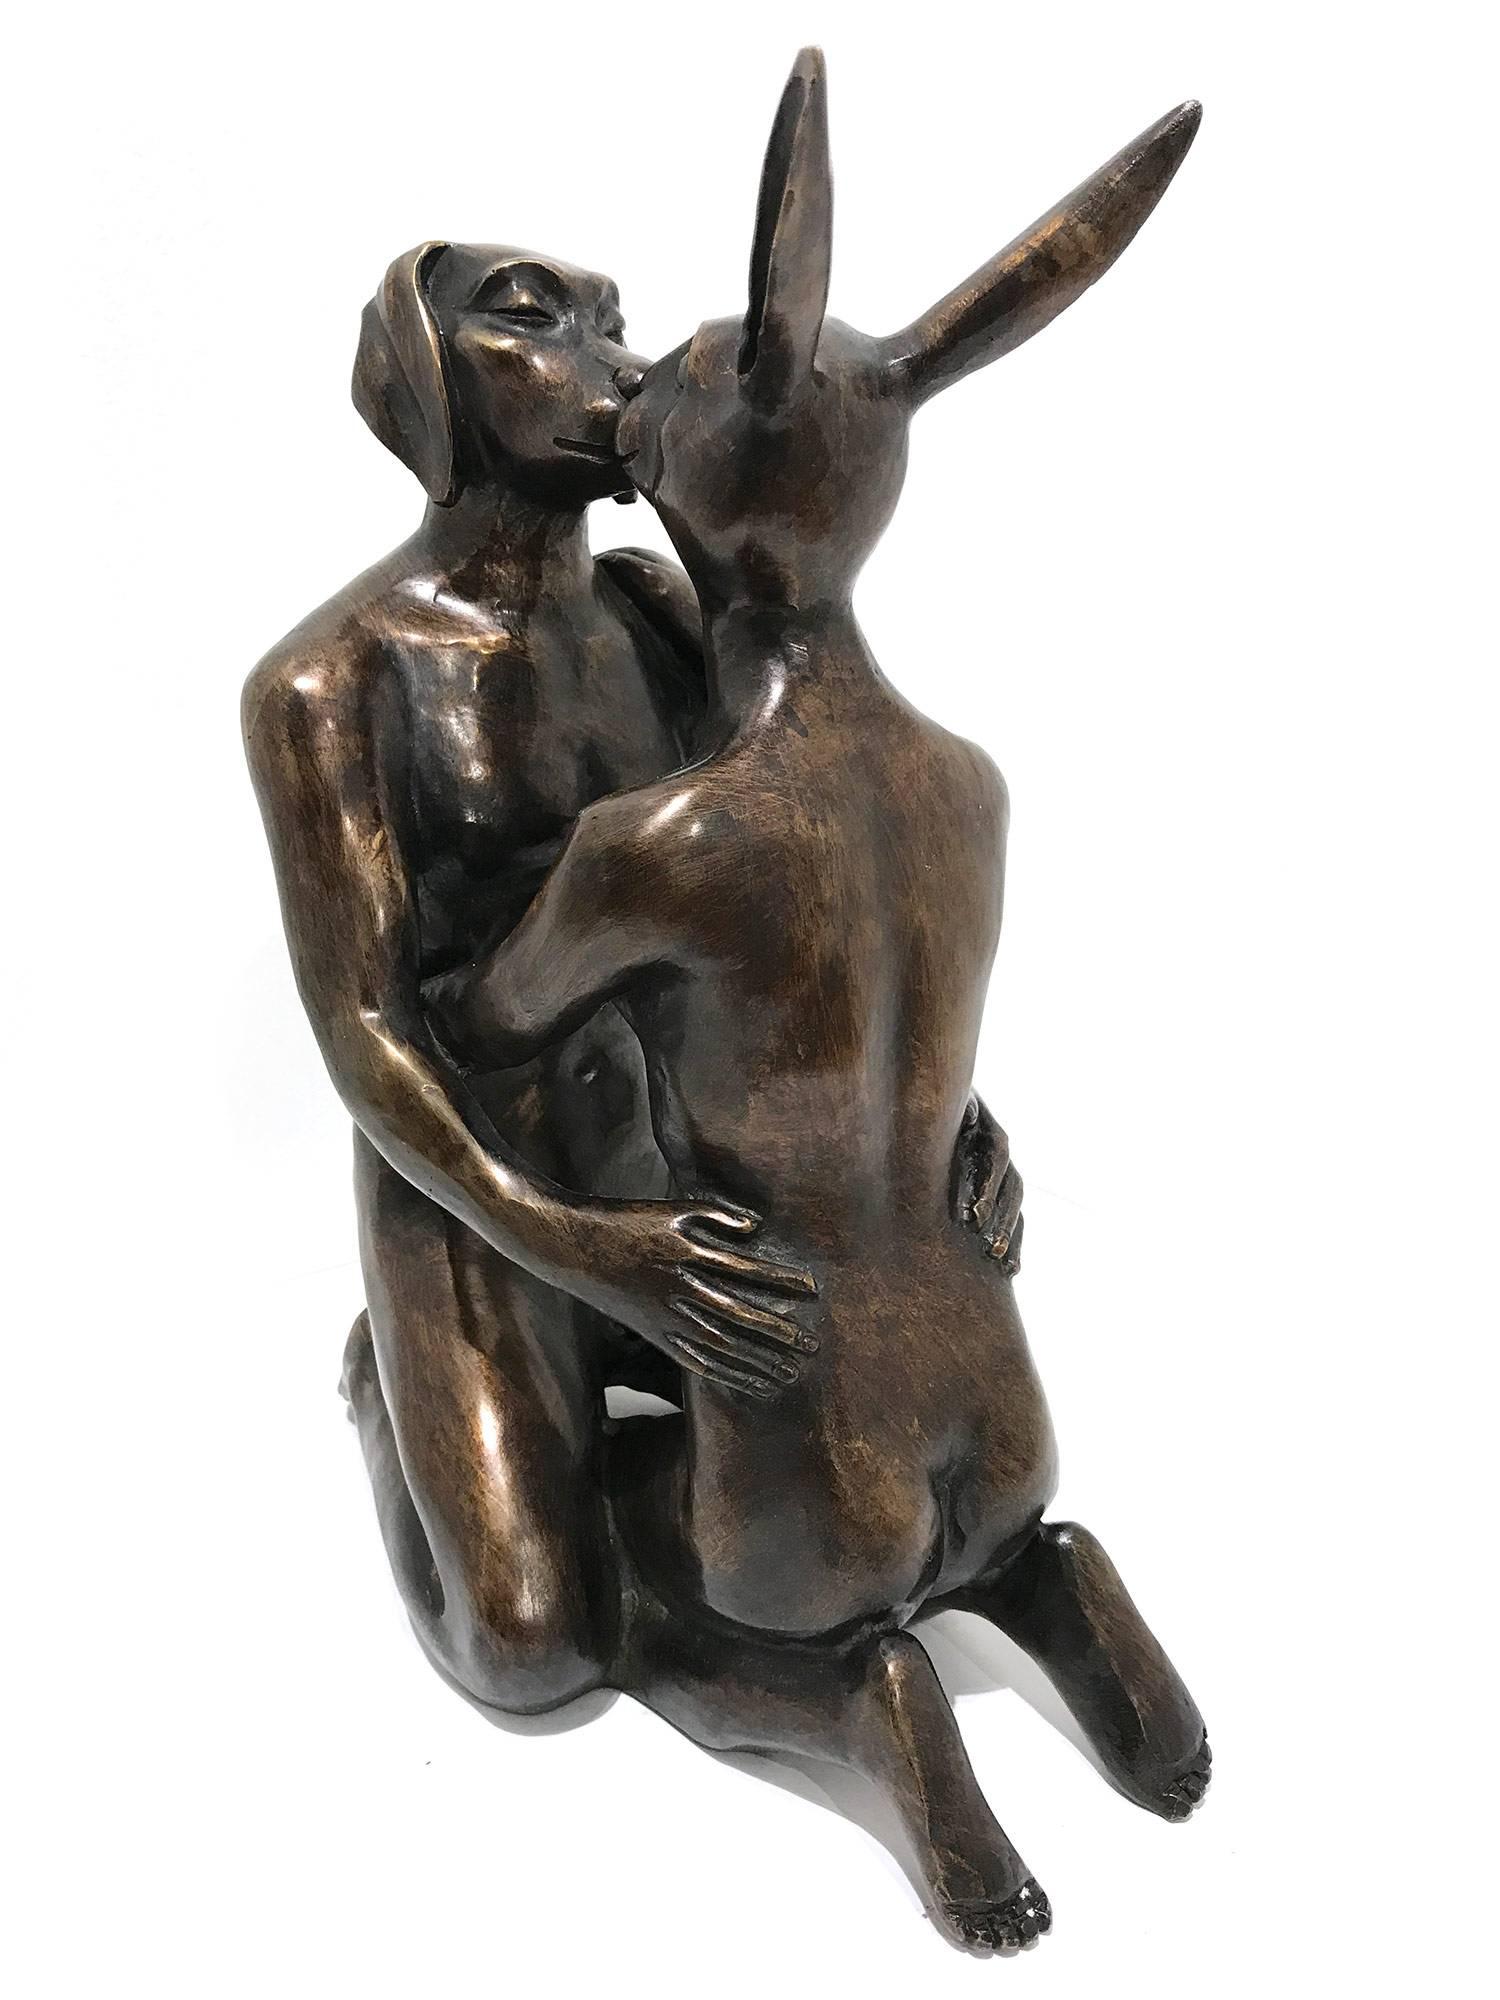 She Kissed Him Like It Was for the First Time - Gold Abstract Sculpture by Gillie and Marc Schattner